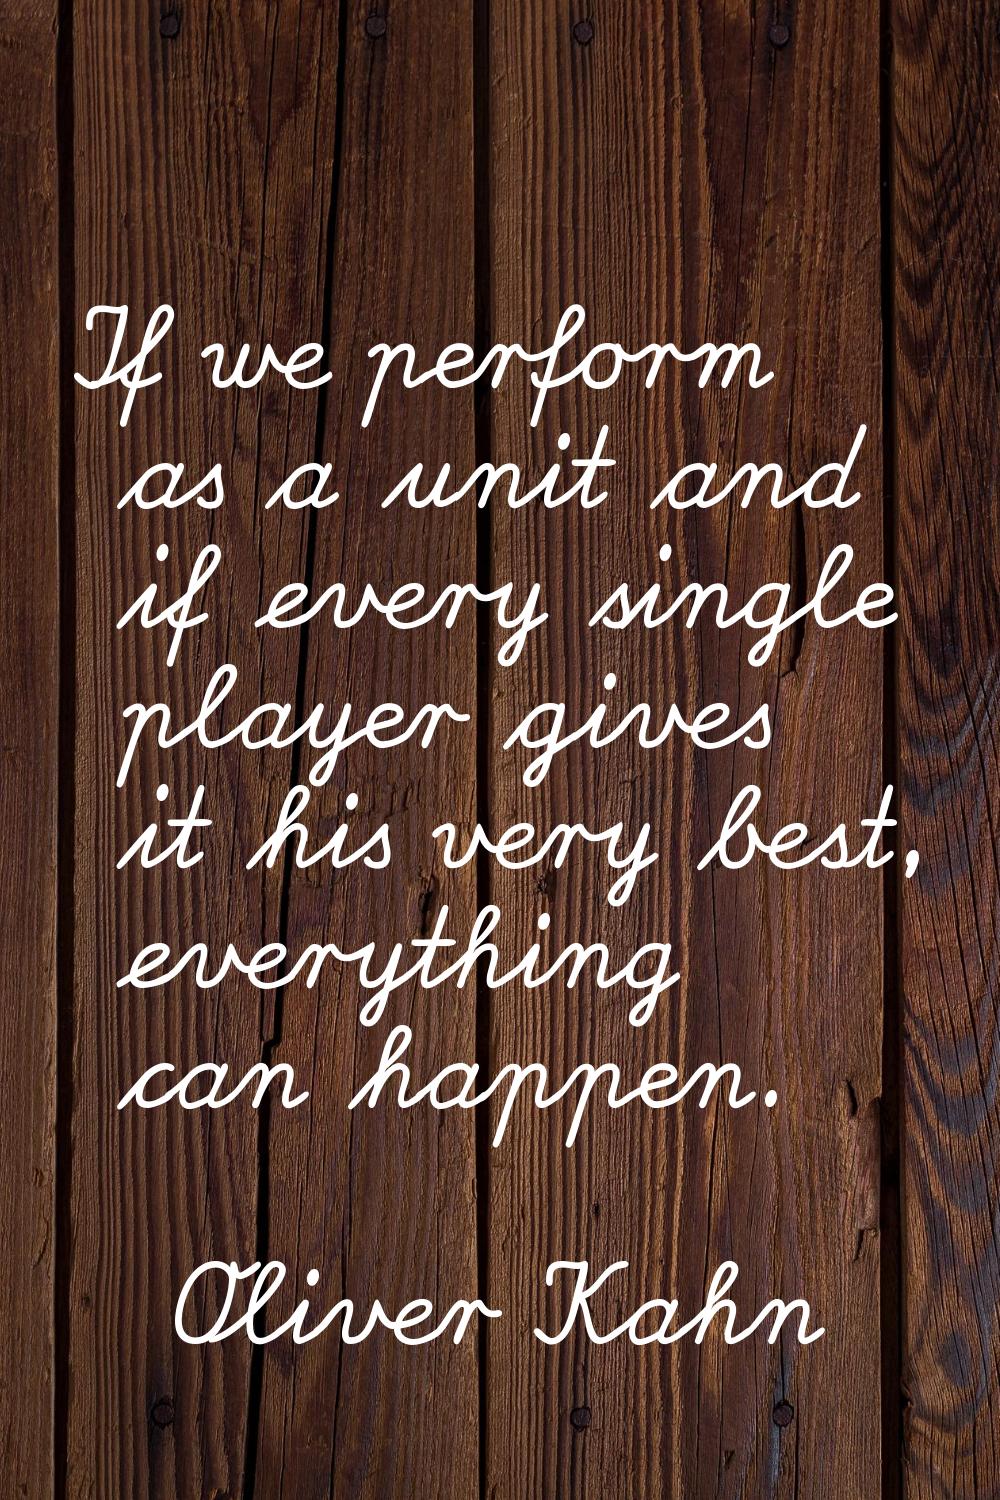 If we perform as a unit and if every single player gives it his very best, everything can happen.